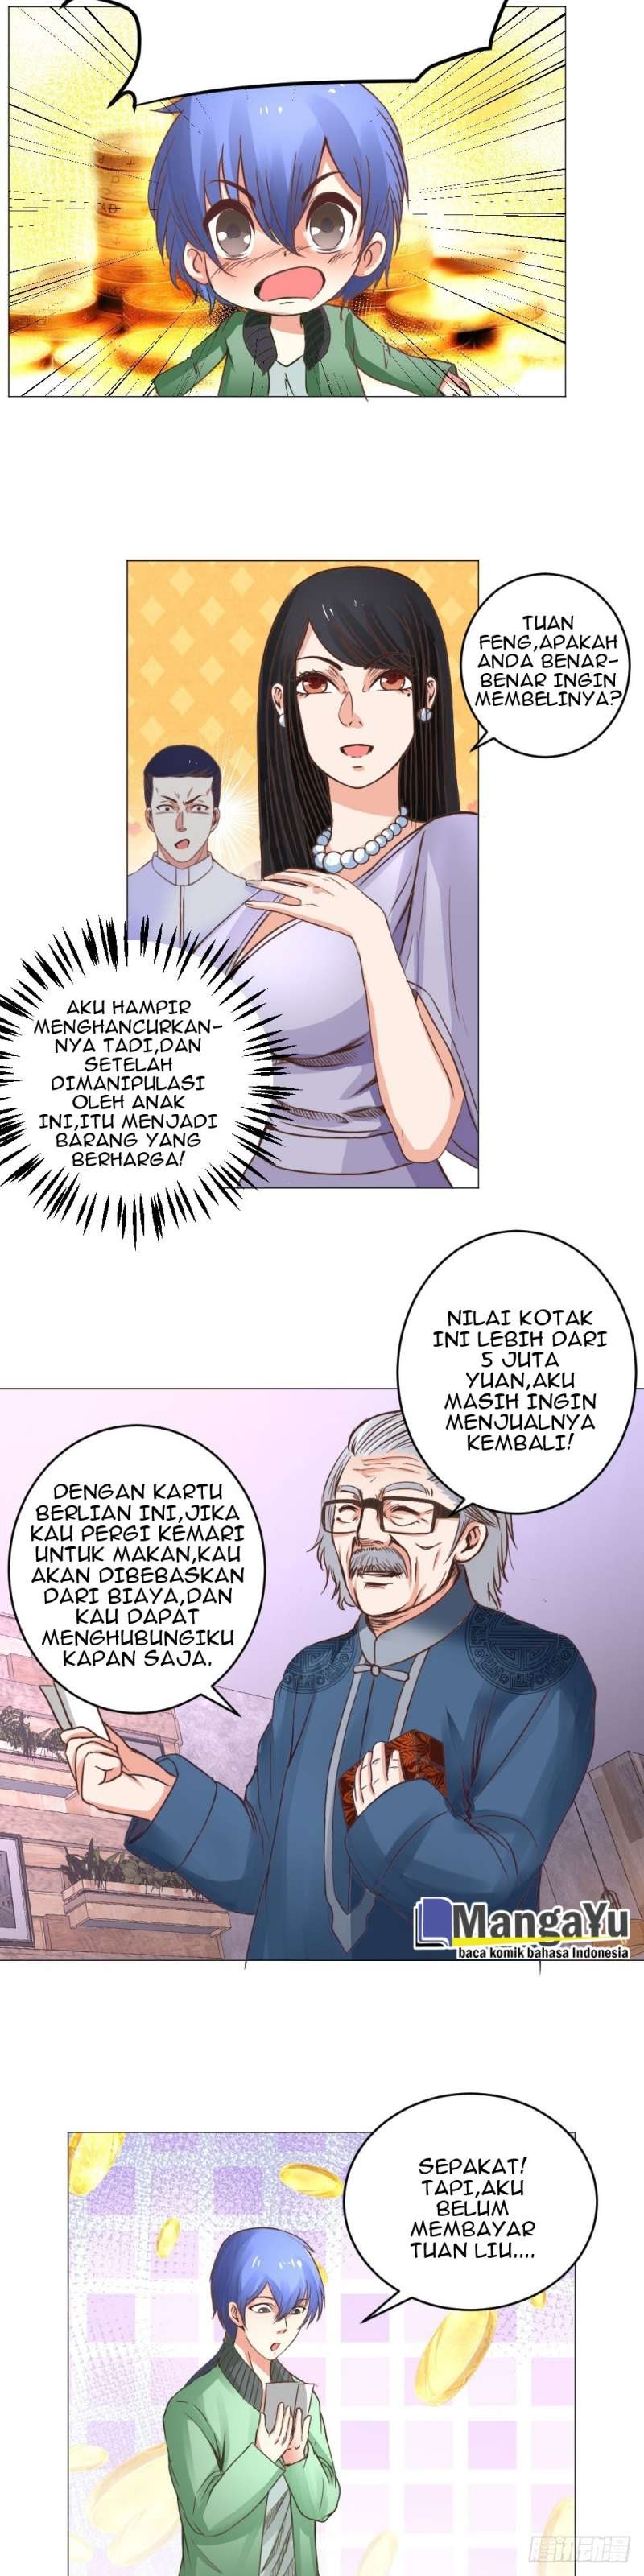 Perspective Medical Saint Chapter 10 9